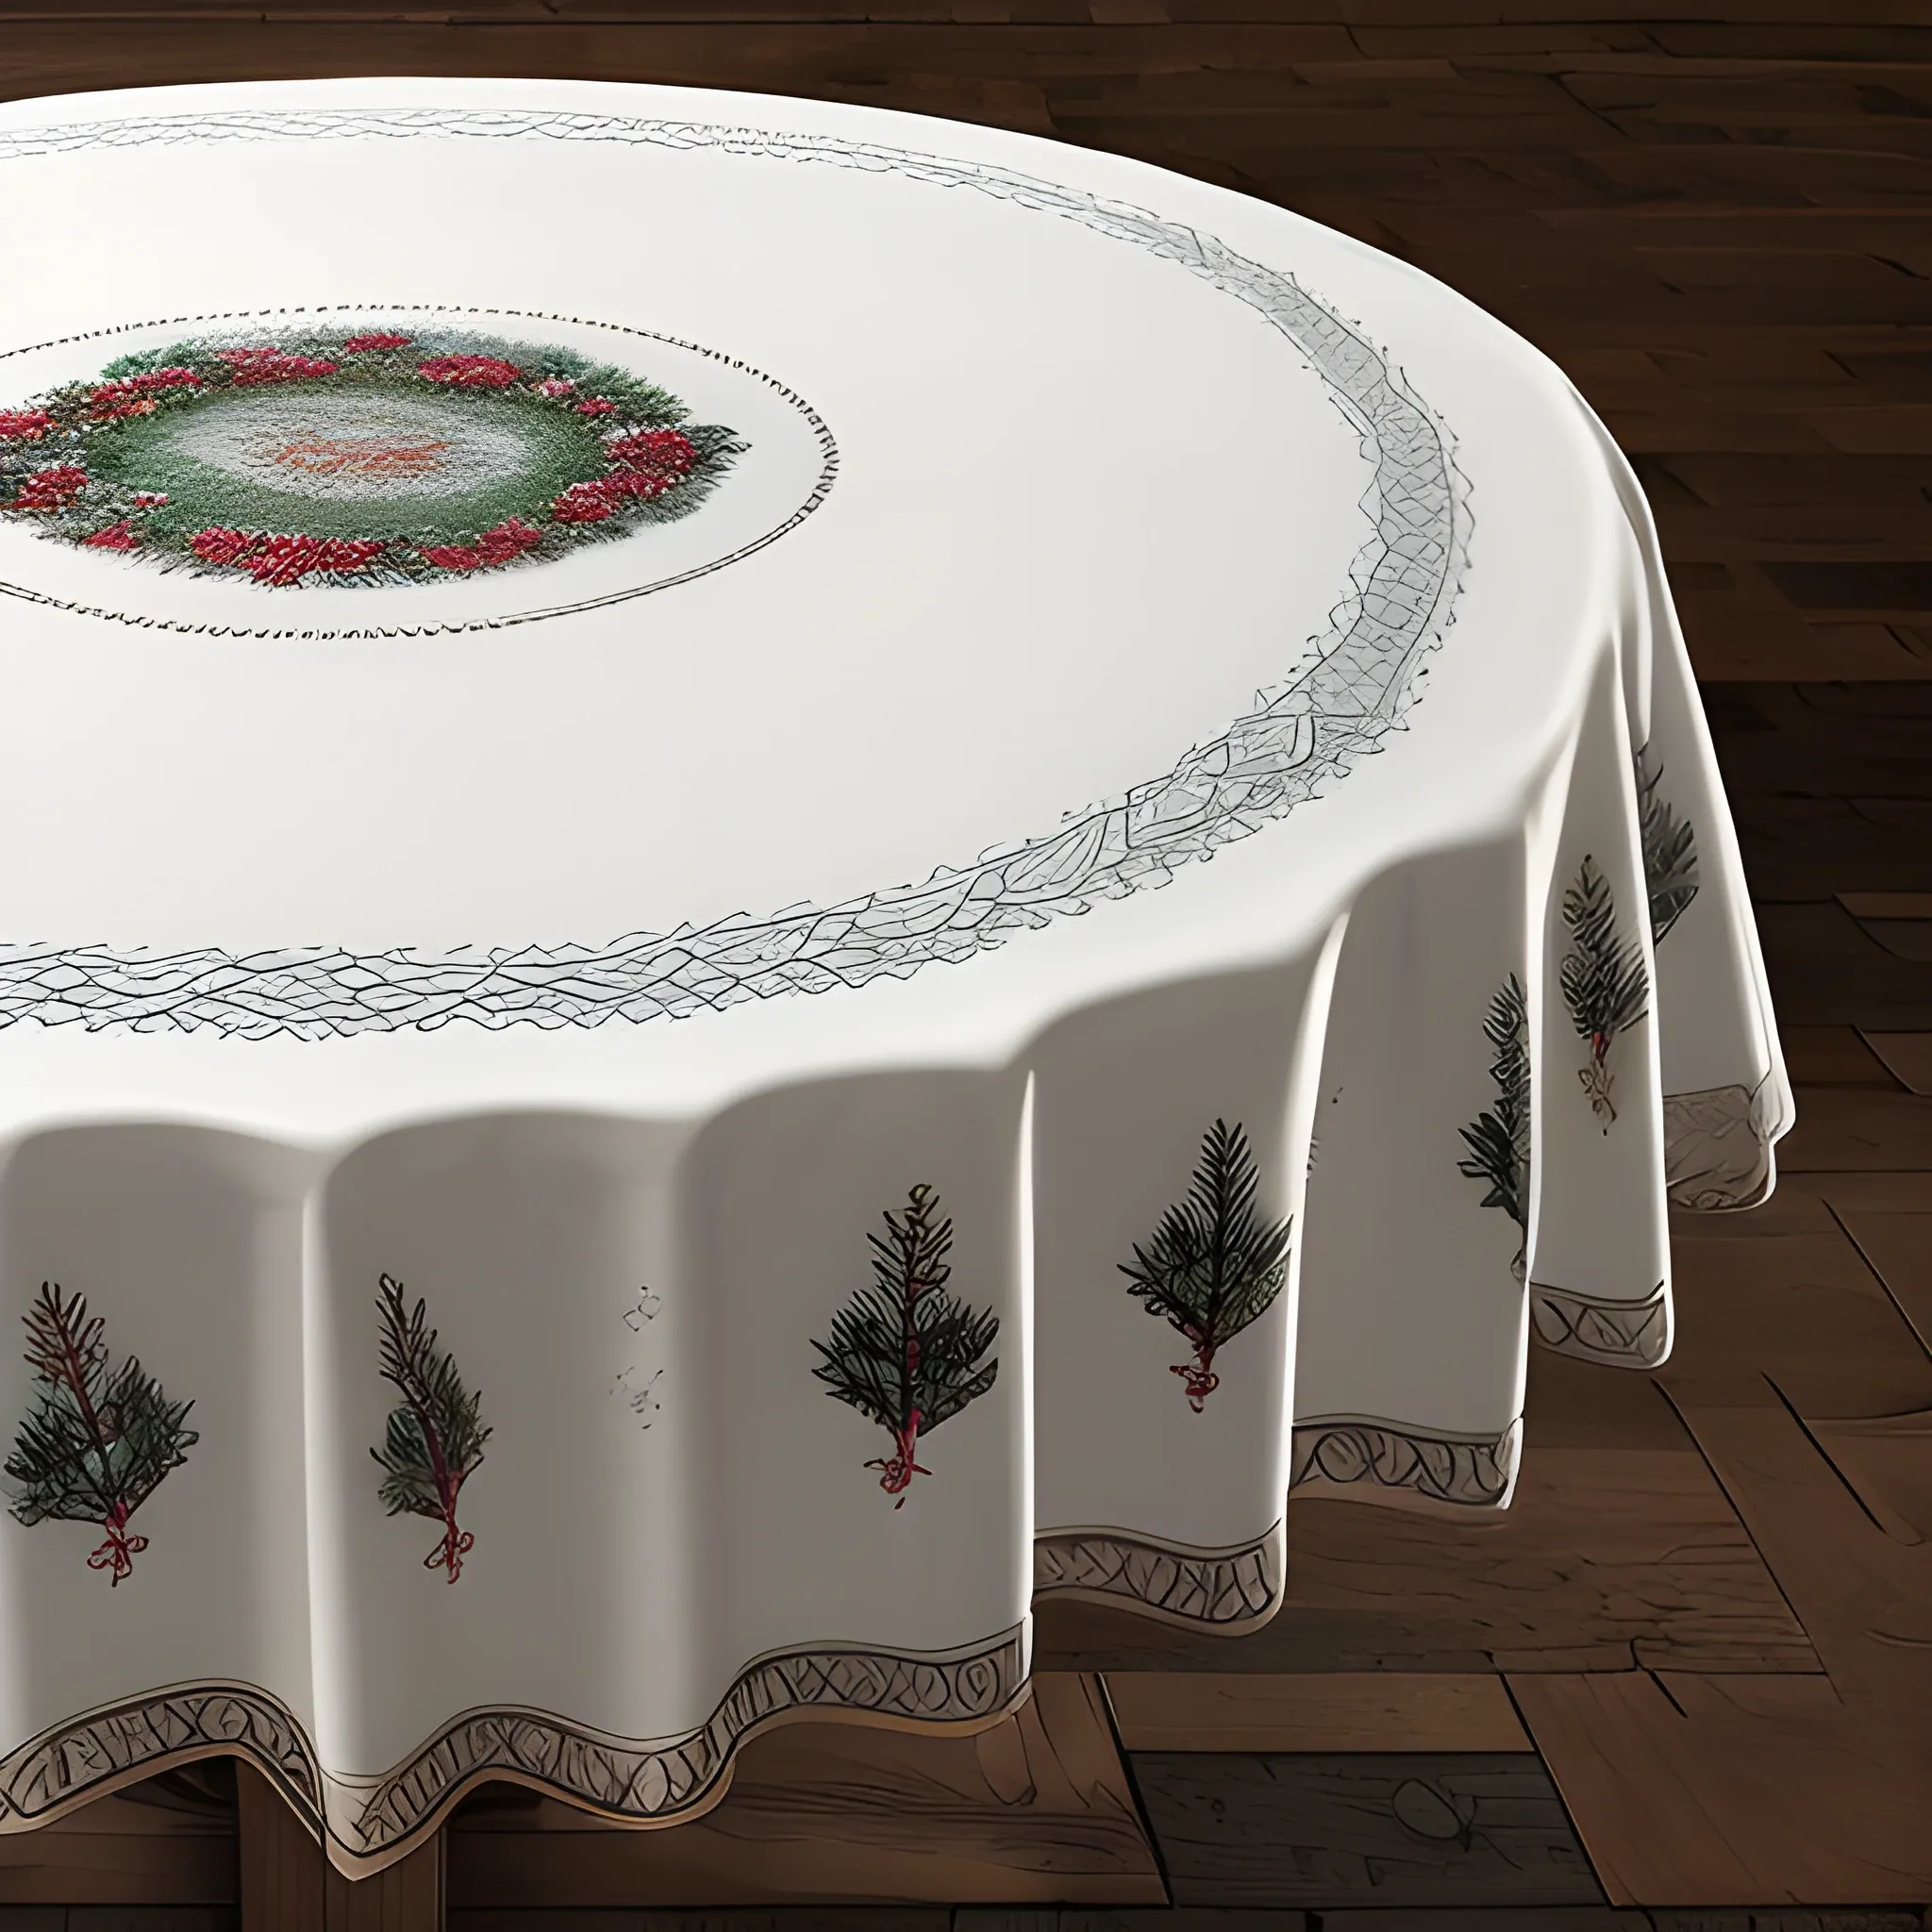 full shape of embroidered round tablecloth with a thick stitch, embroidered edges depicts a winter landscape. extremely detailed, hyper-realistic, high resolution, incredibly realistic and detailed expressions 